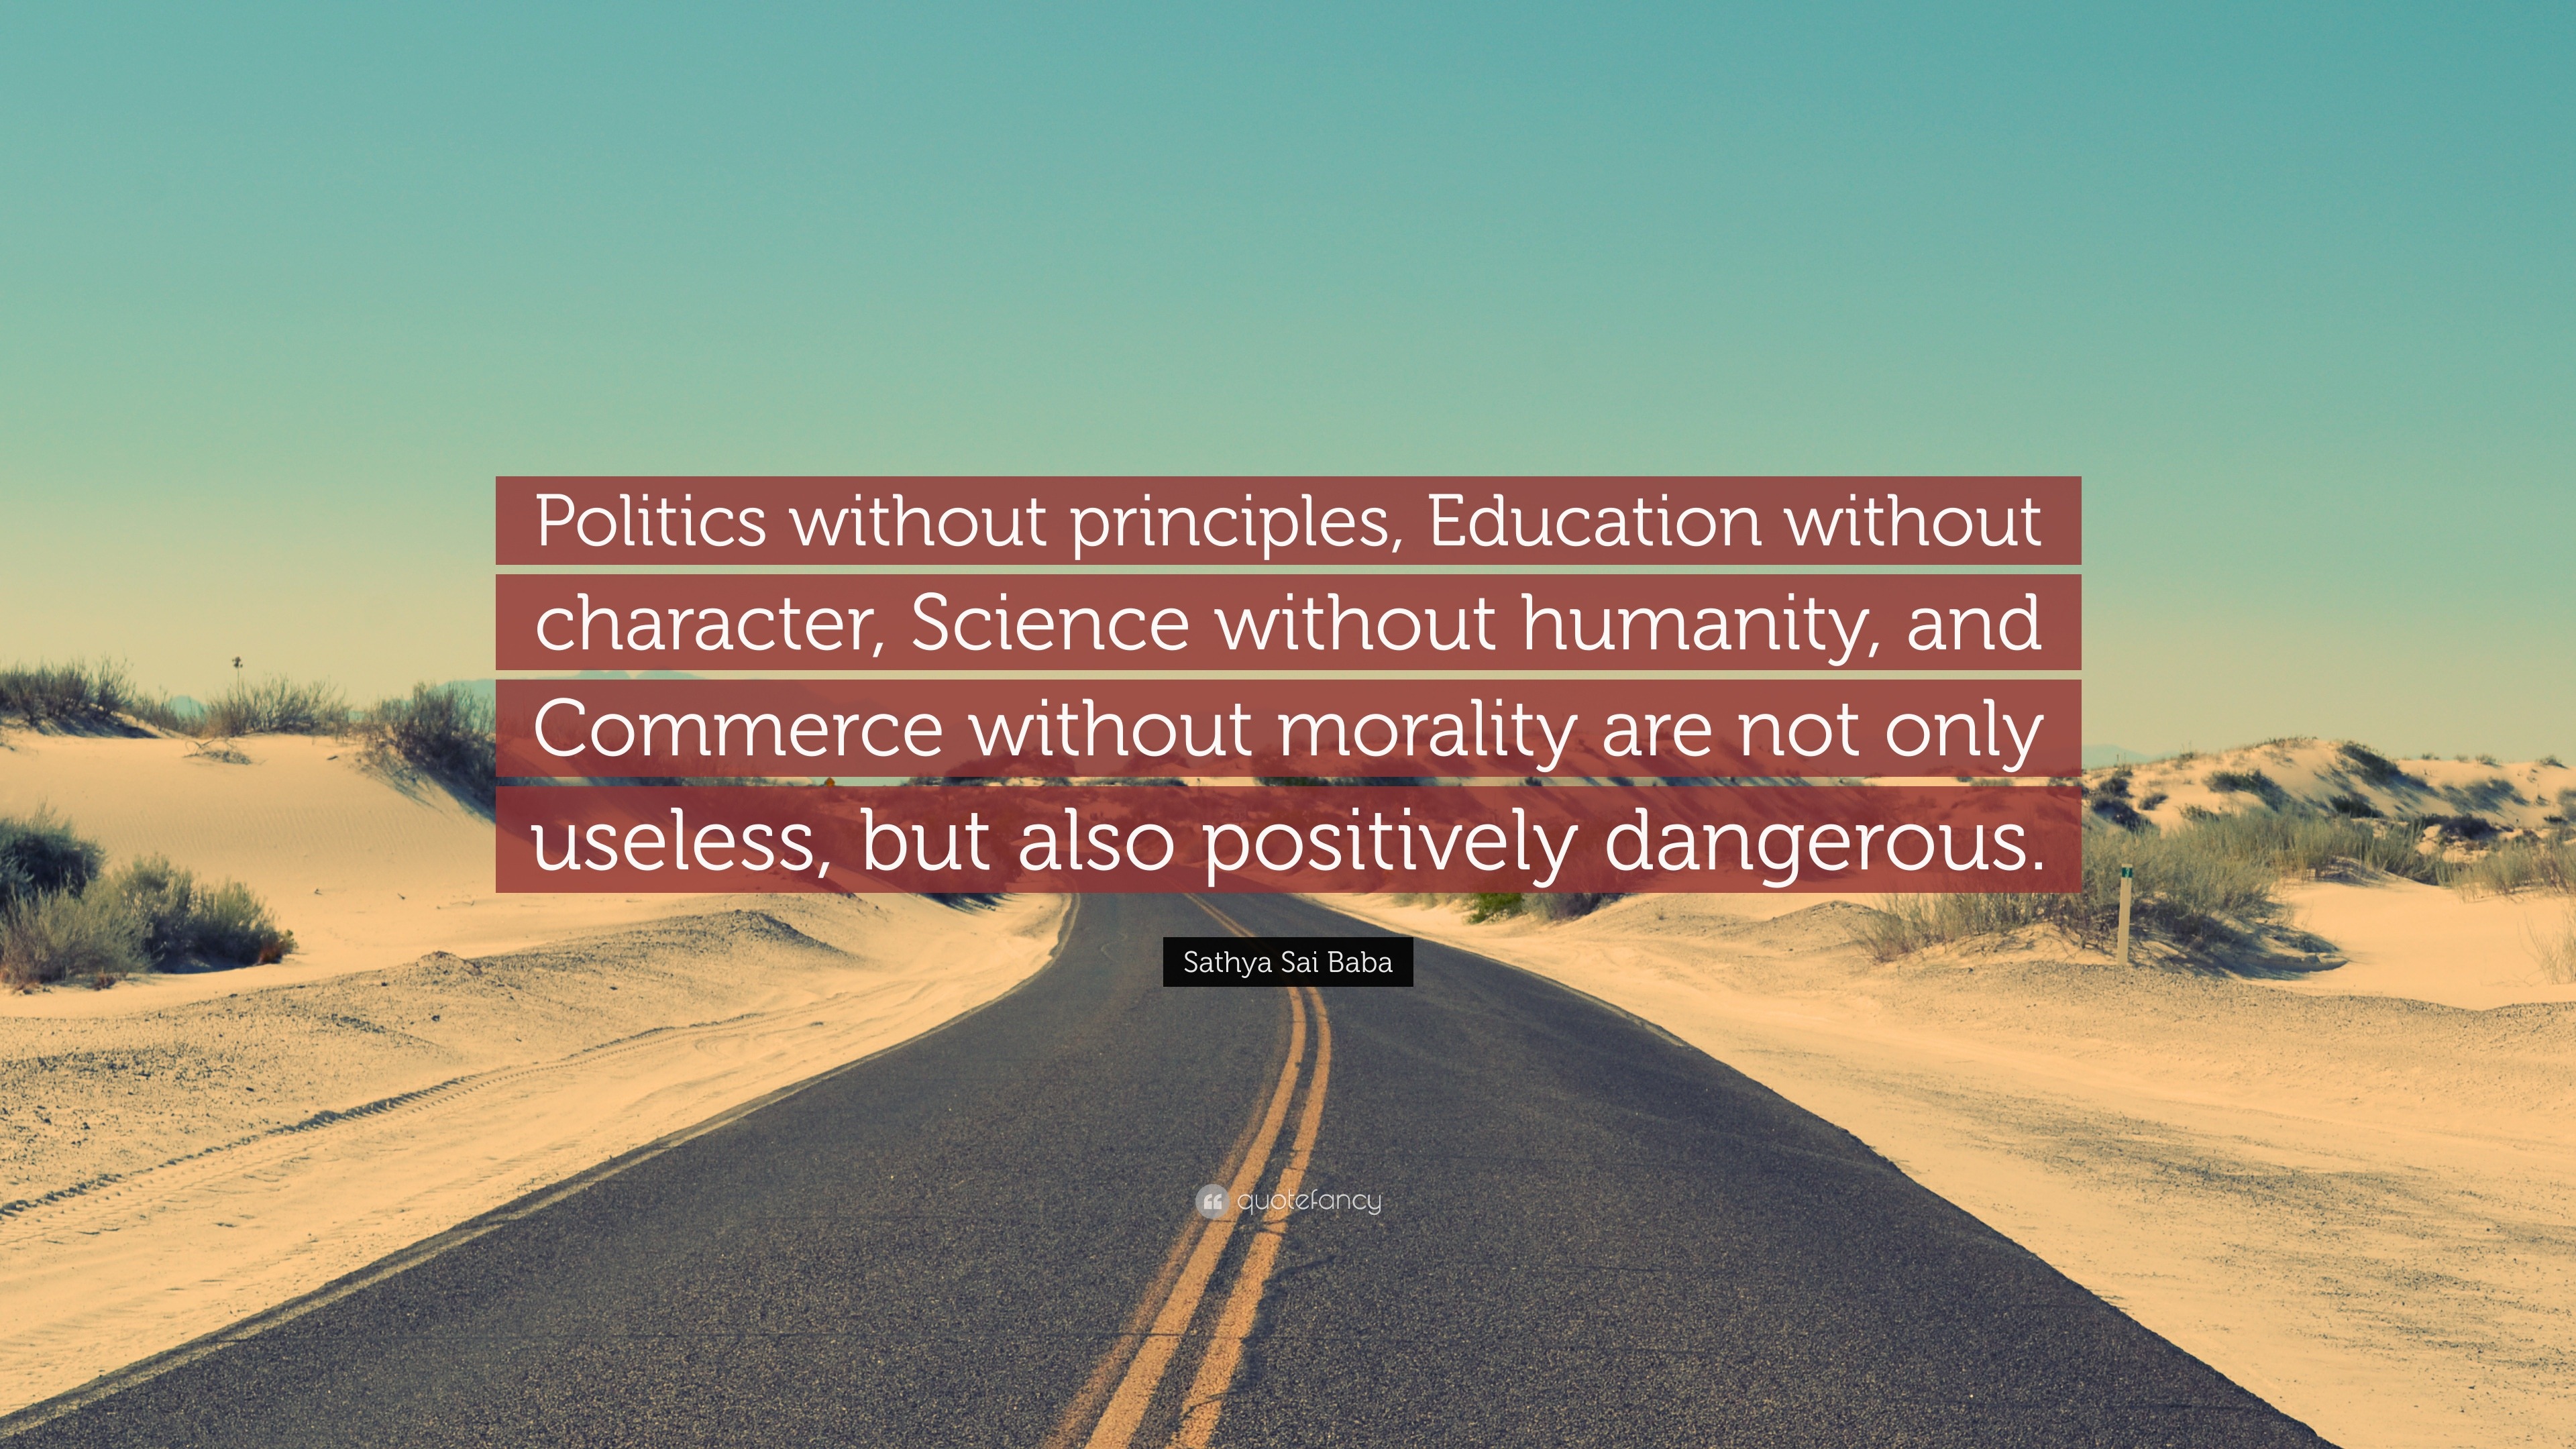 commerce without morality